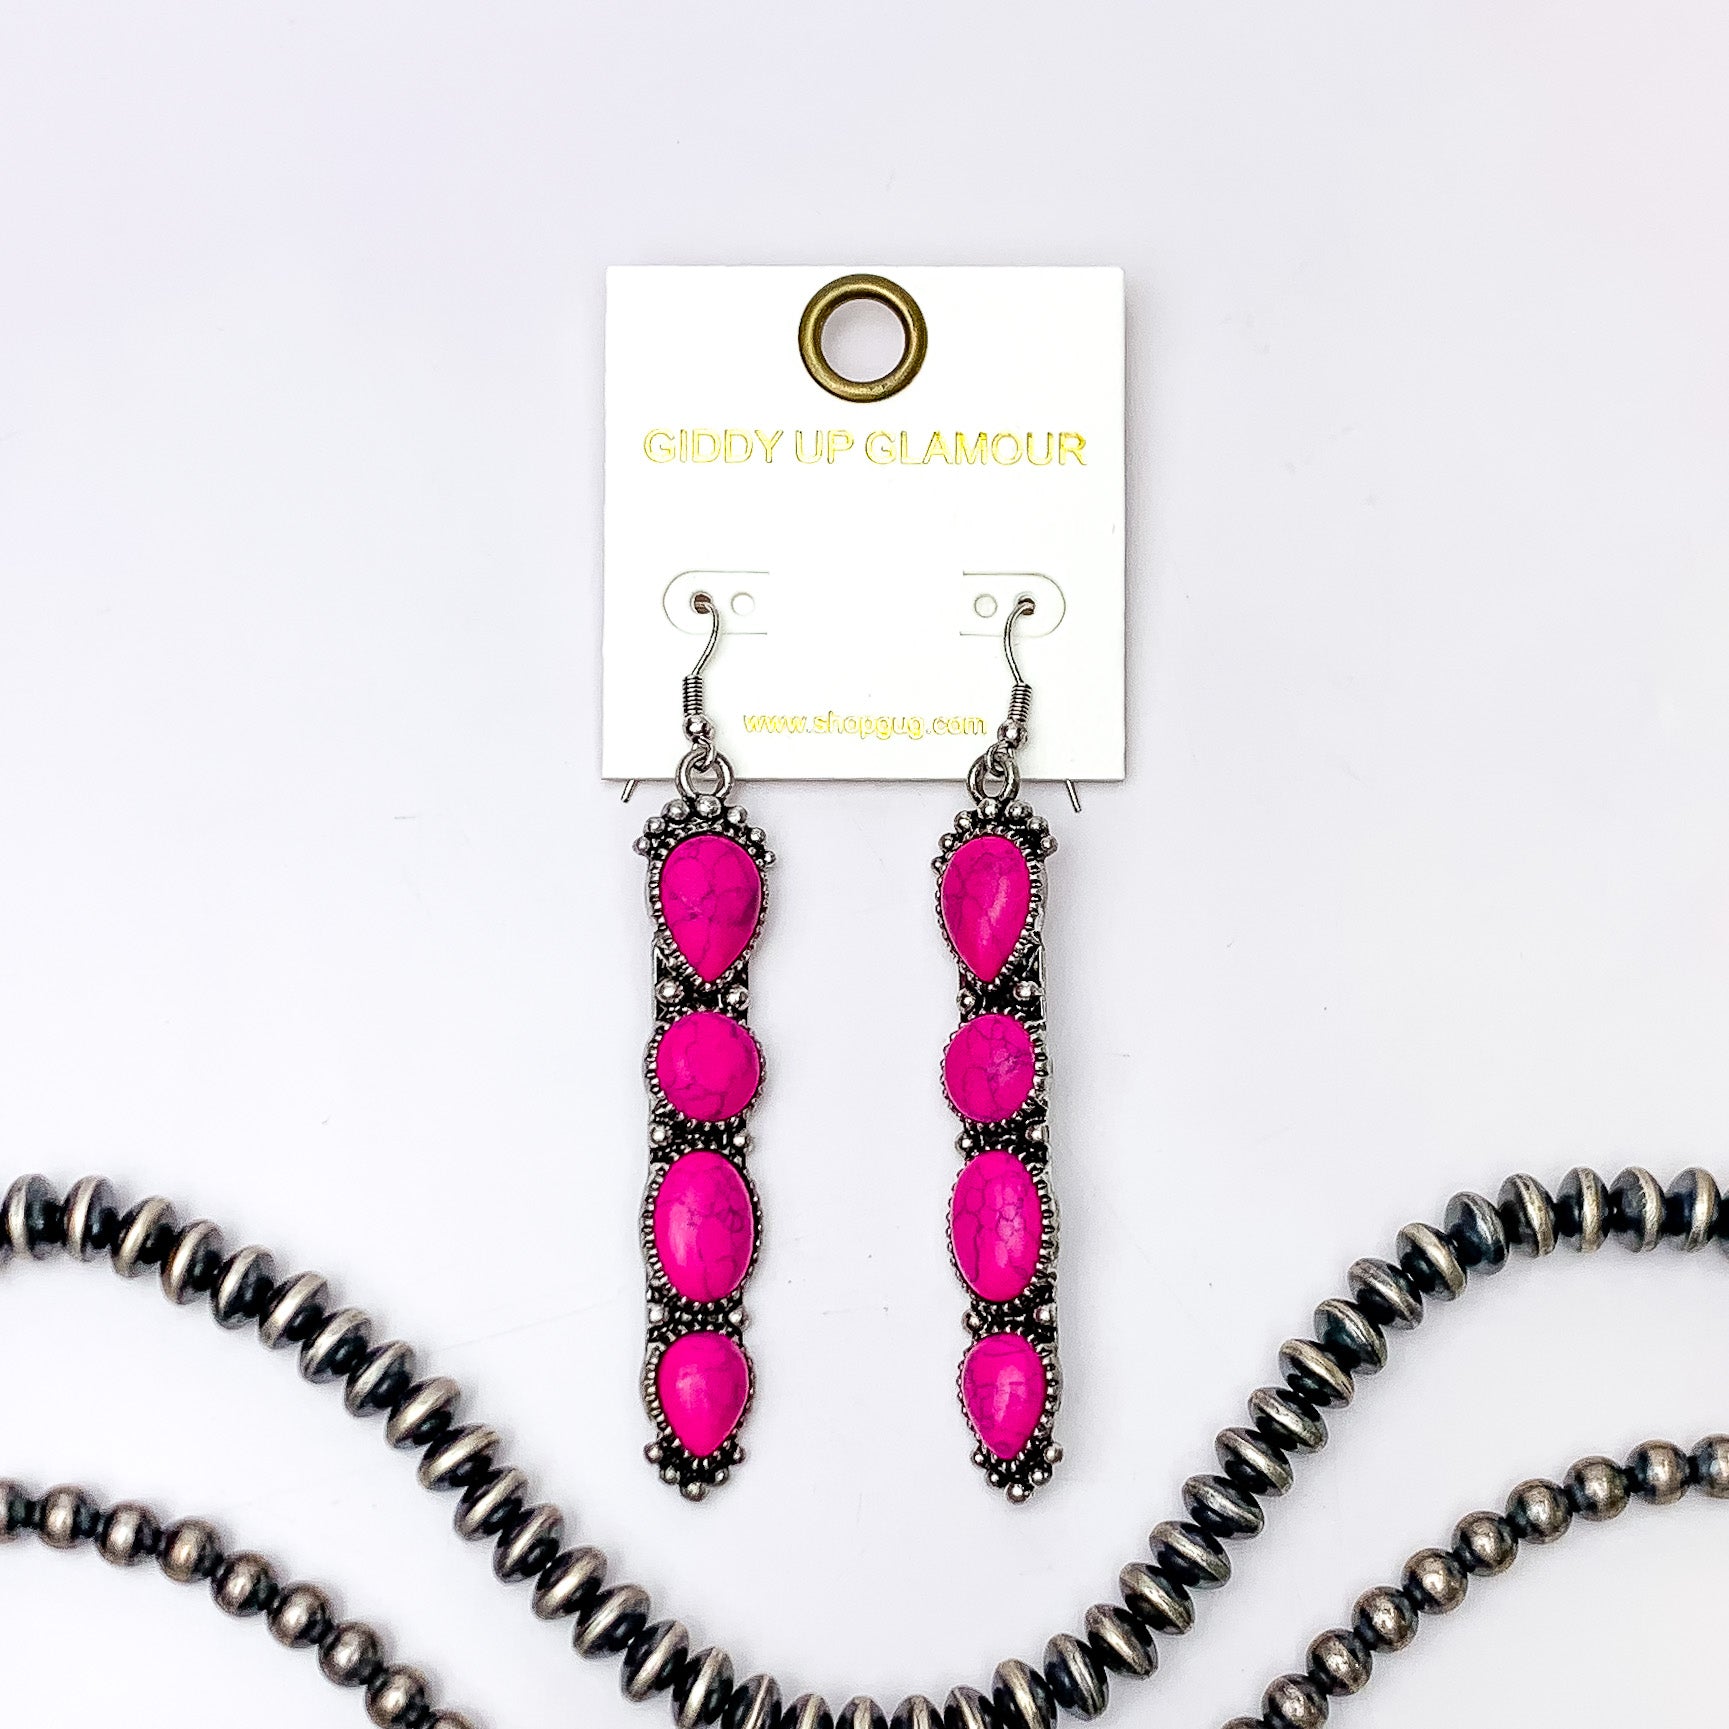 Silver fish hook earrings with a four, fuchsia pink stone pendant. These earrings are pictured on a white background with silver beads at the bottom of the picture. 